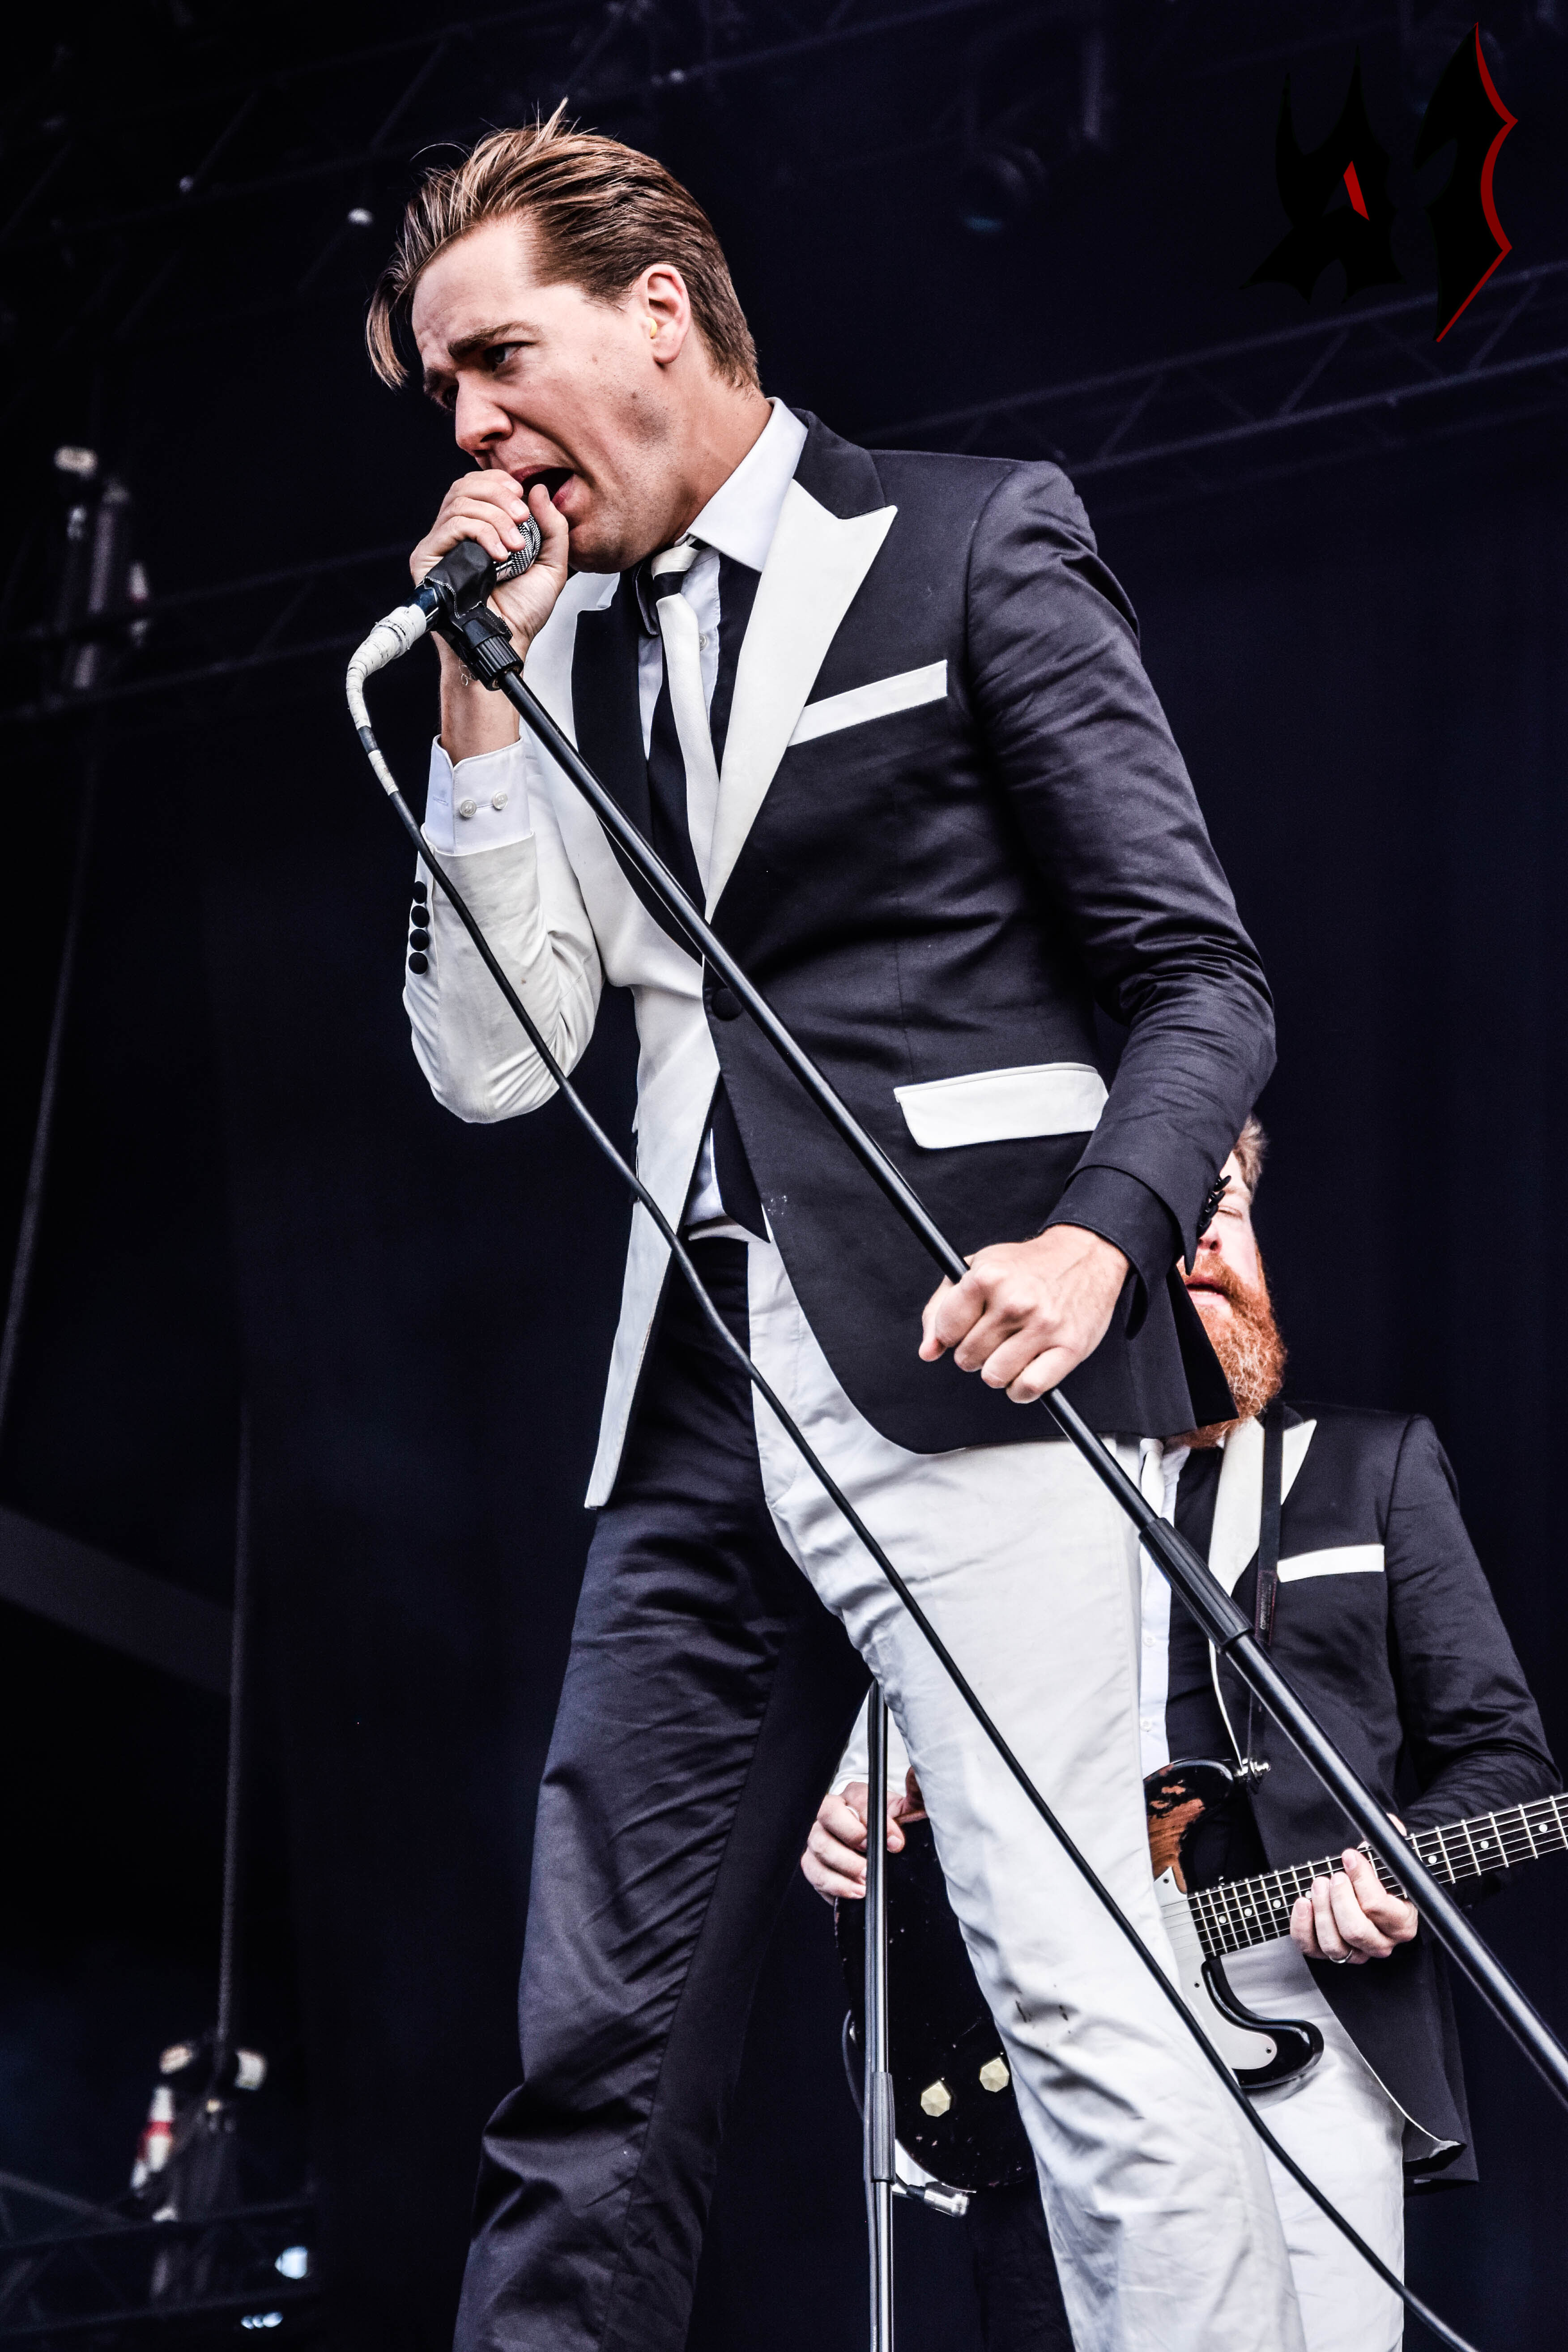 Donwload 2018 – Day 3 - The Hives 3